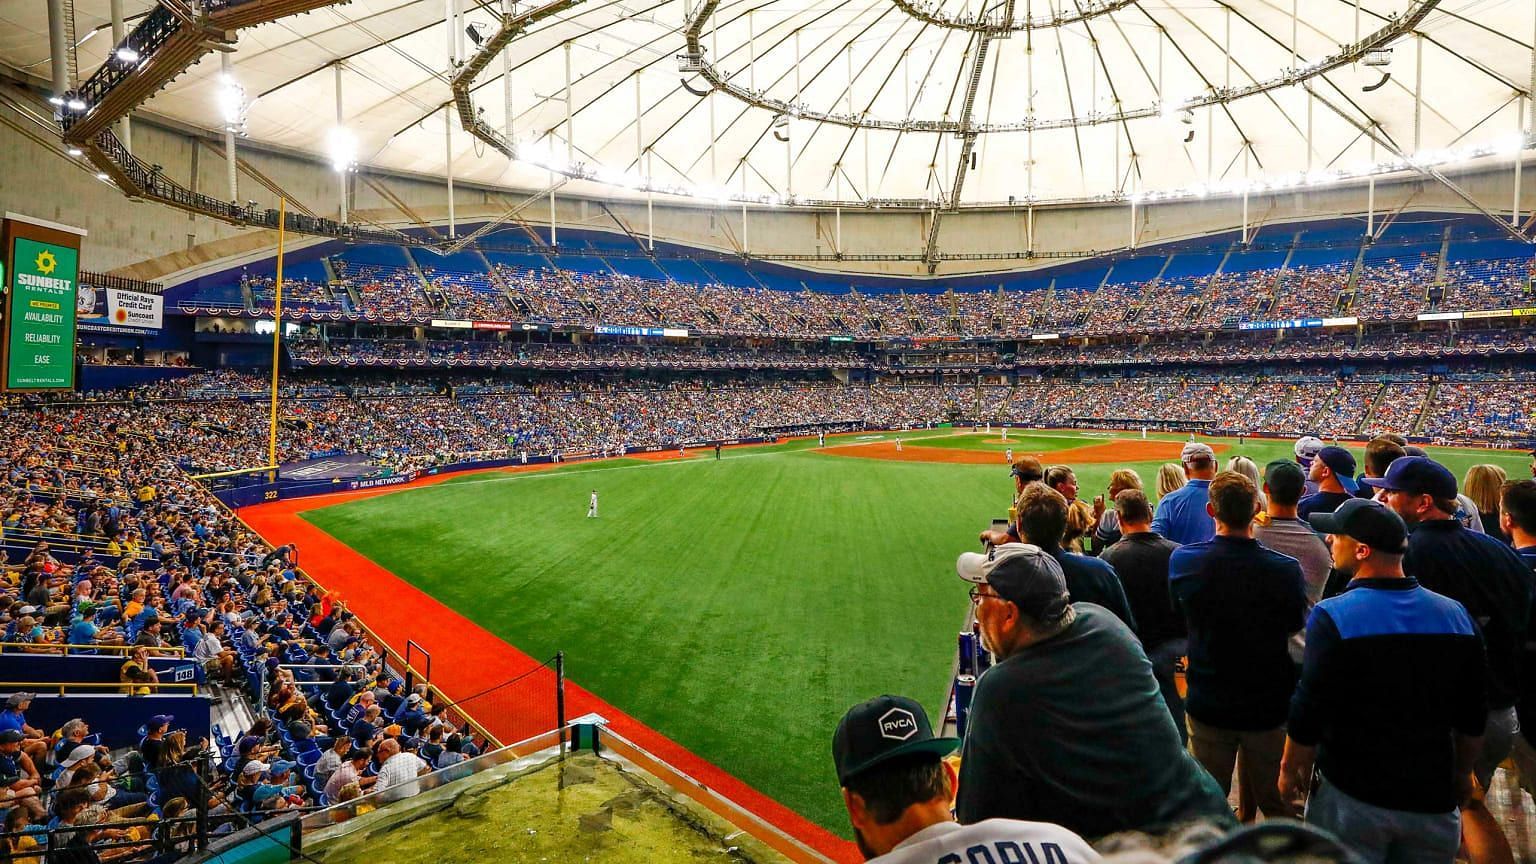 Tropicana Field home of the Tampa Bay Rays